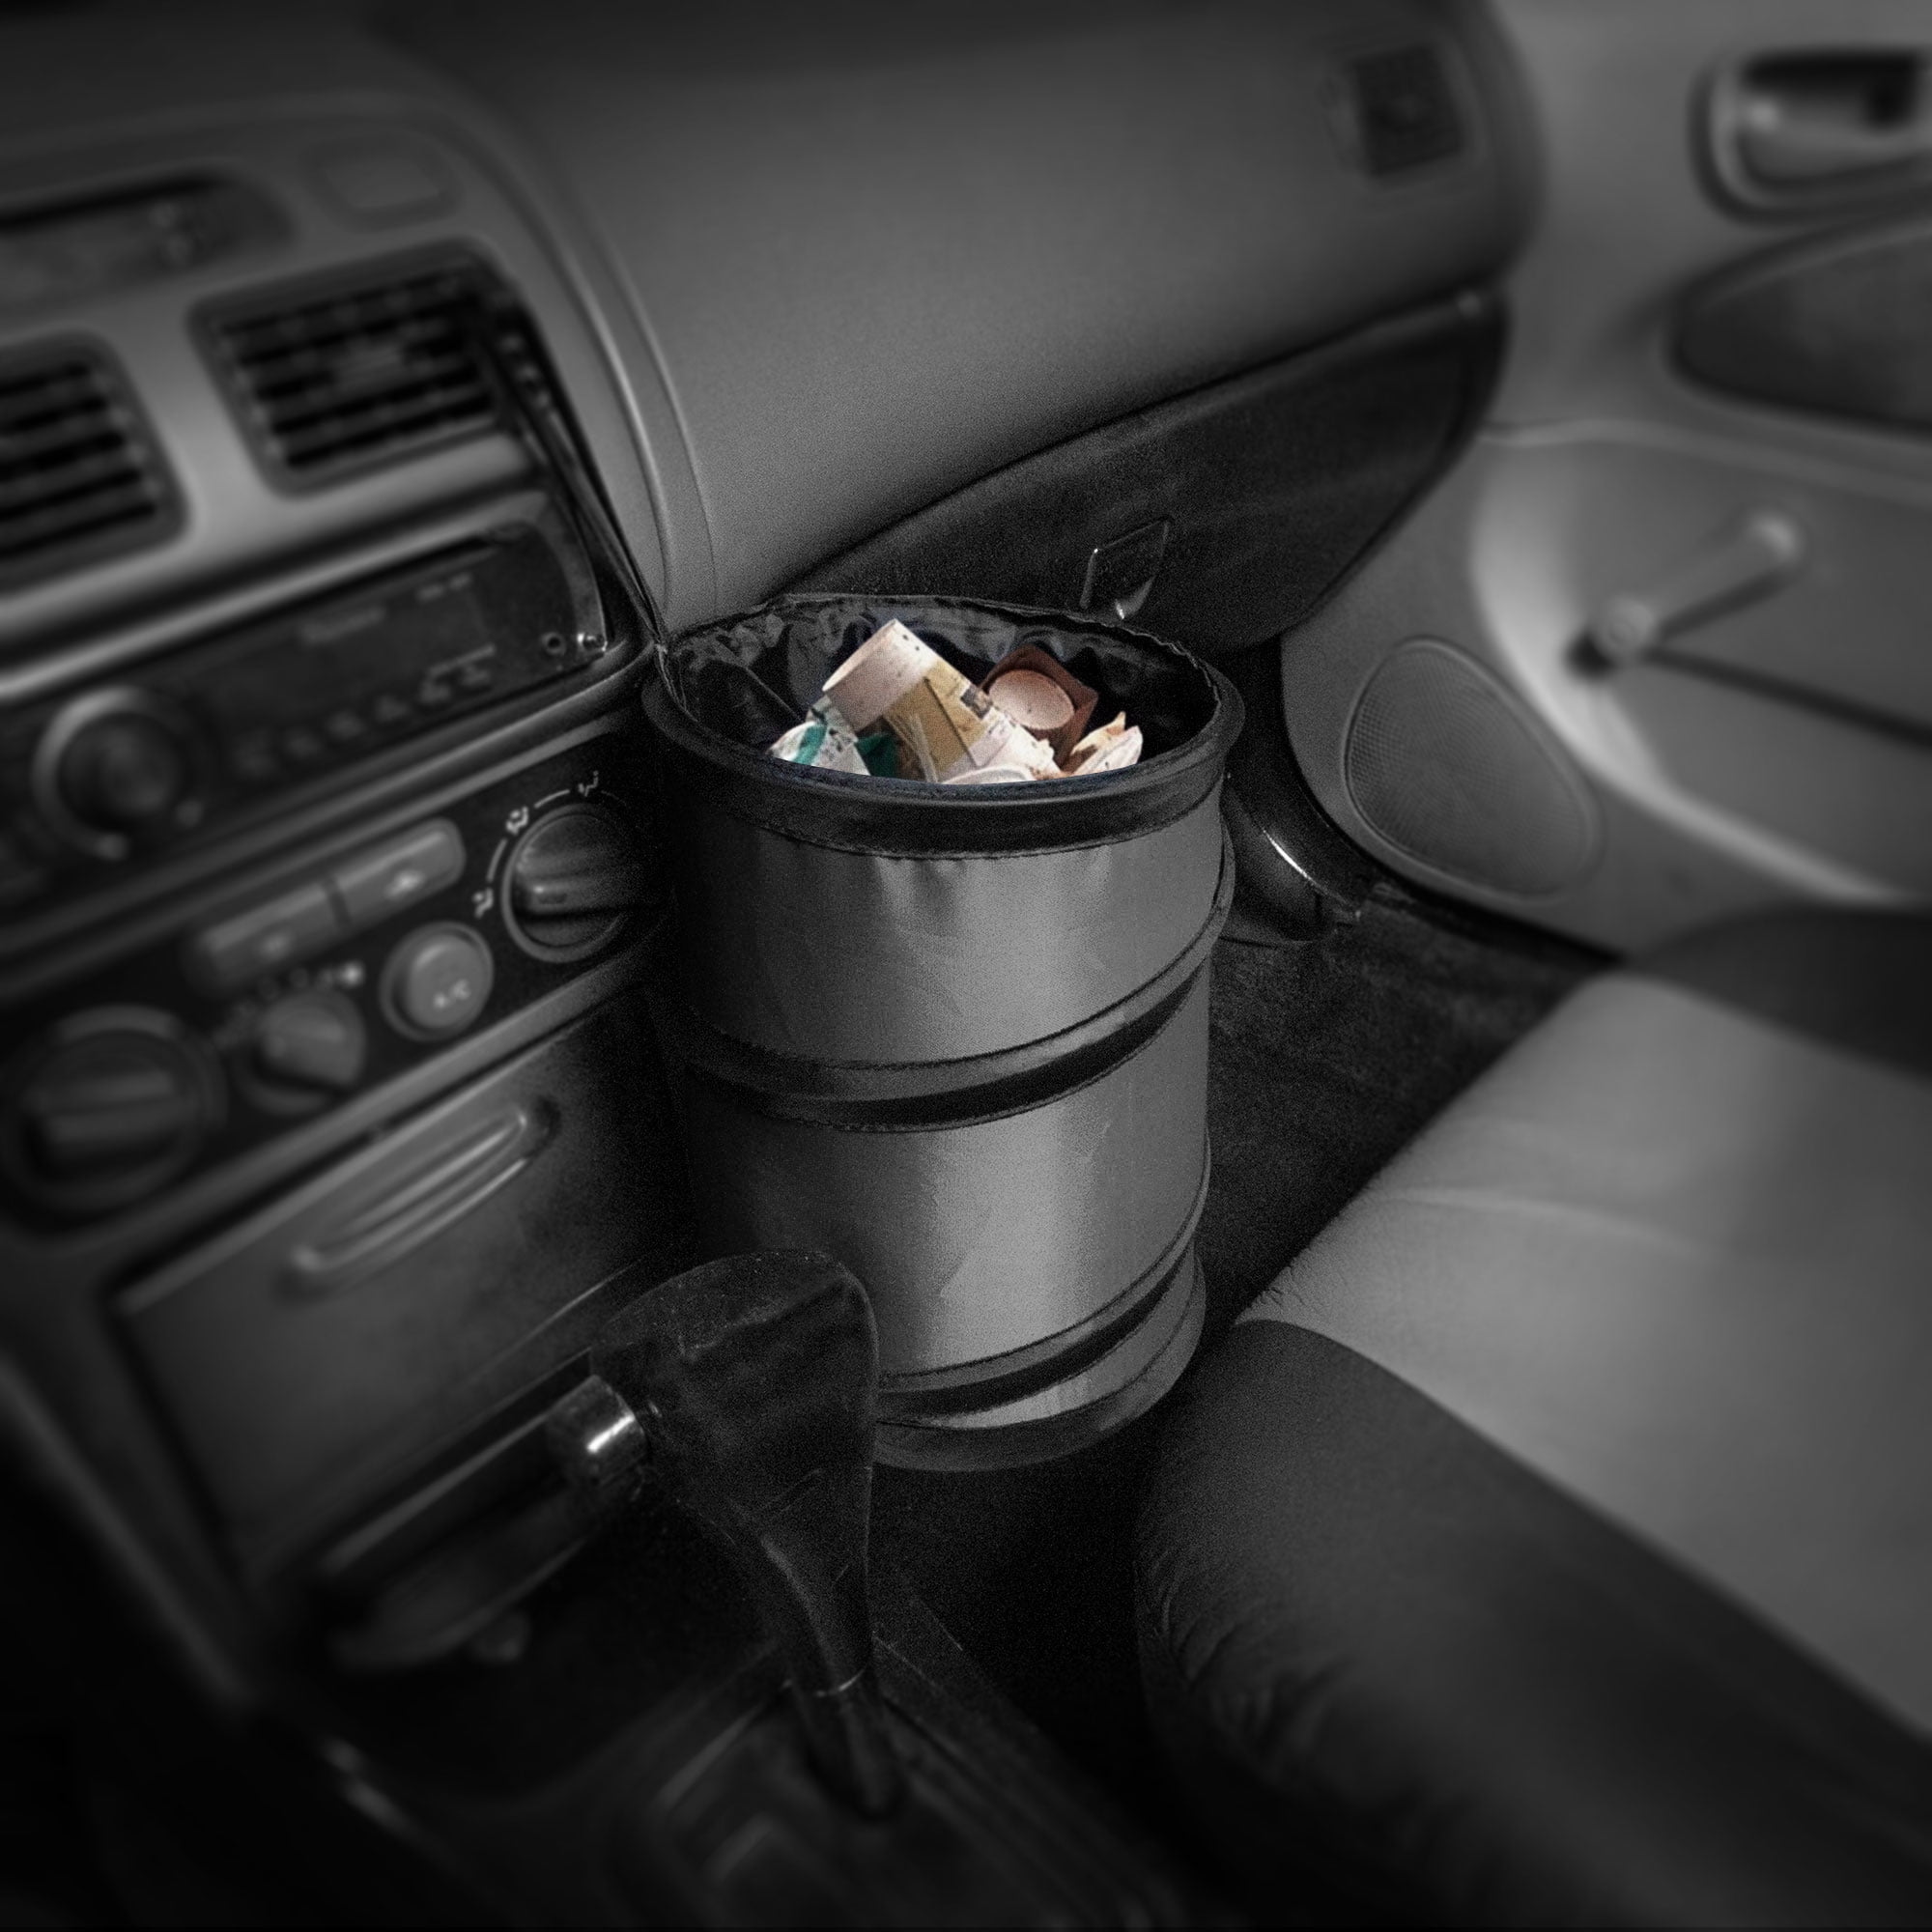 Scossa Car Garbage Can Snacks Waterproof! Cans Now Bigger with 3 Side Pockets for Toys Black Drinks. FBA_SC-01